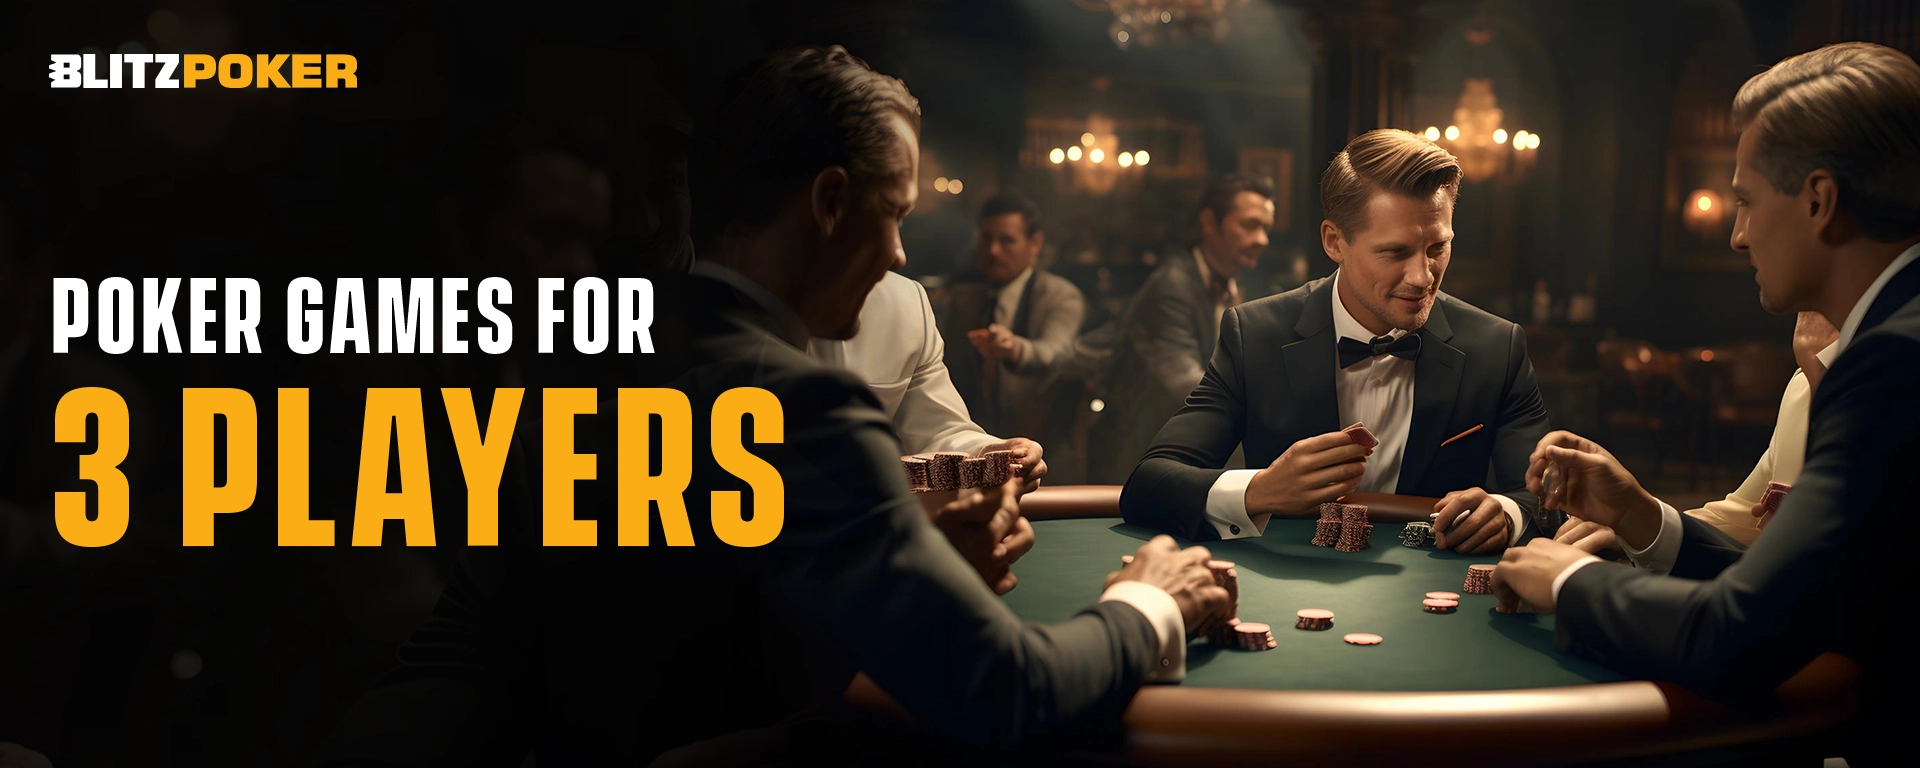 Poker Games for 3 Players